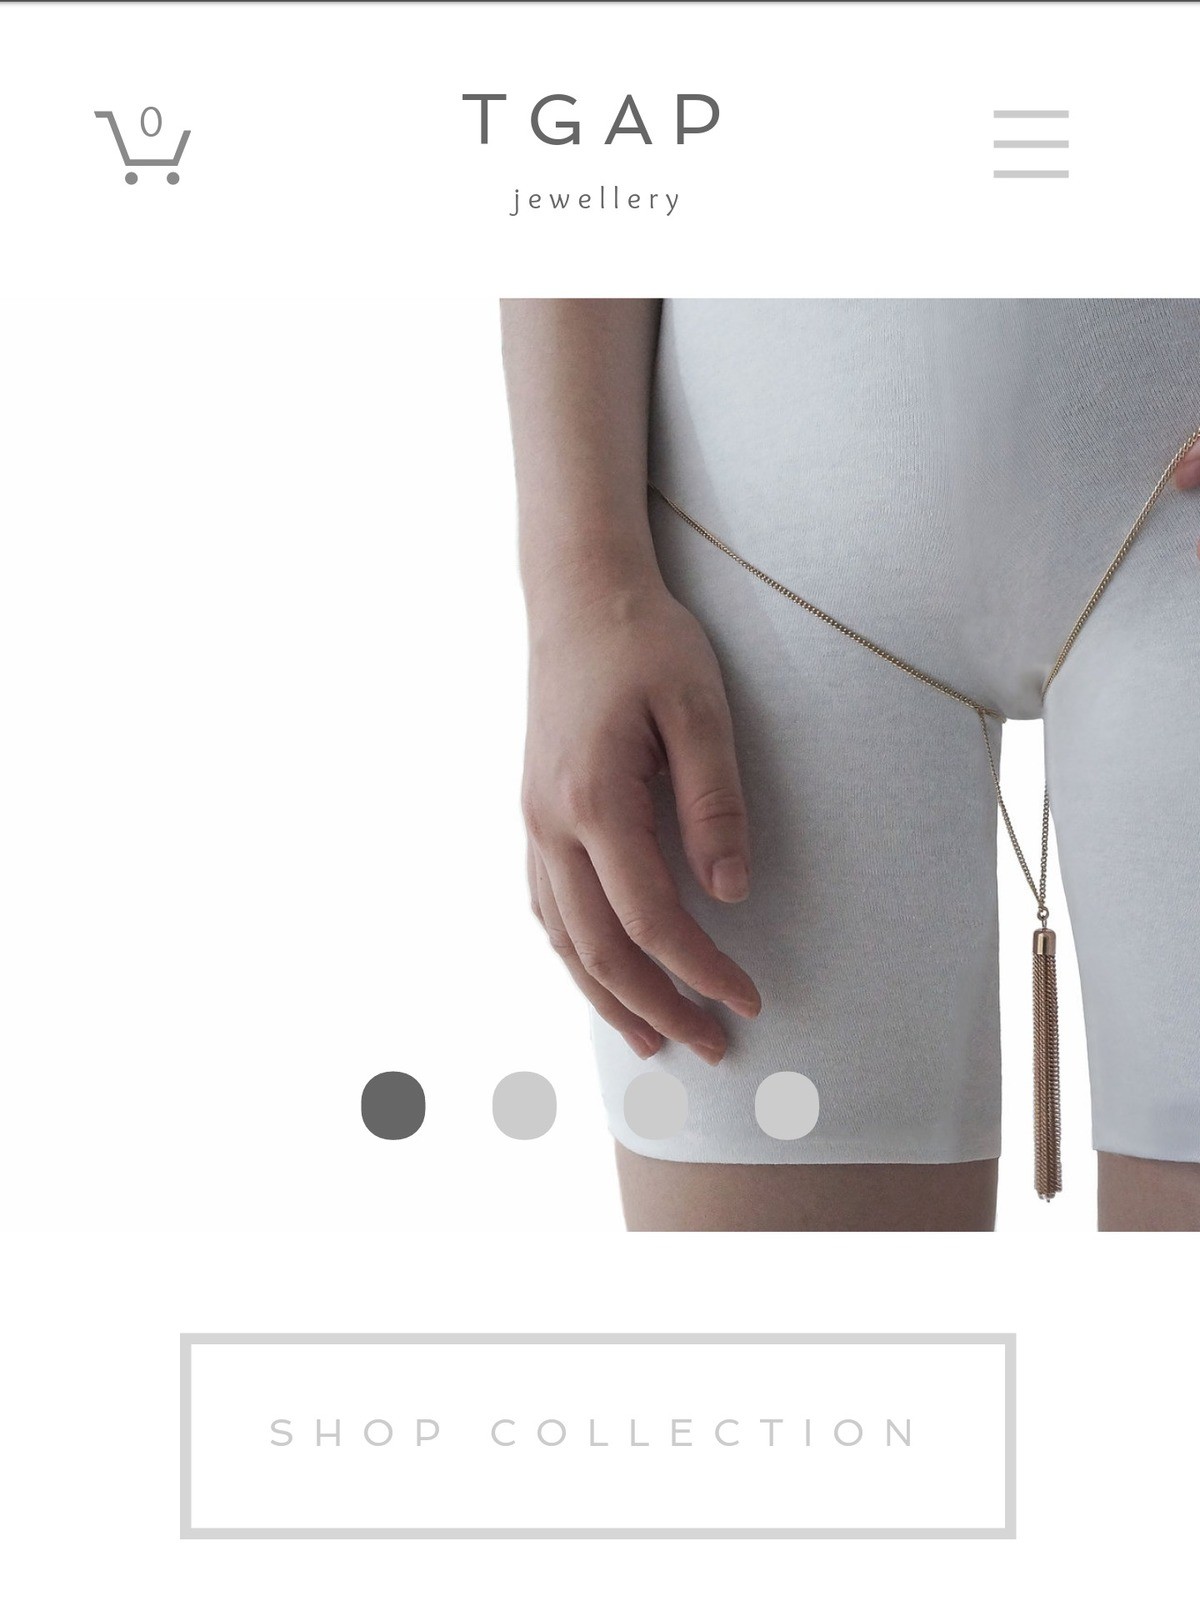 Someone Went and Made Jewelry for People With Thigh Gaps